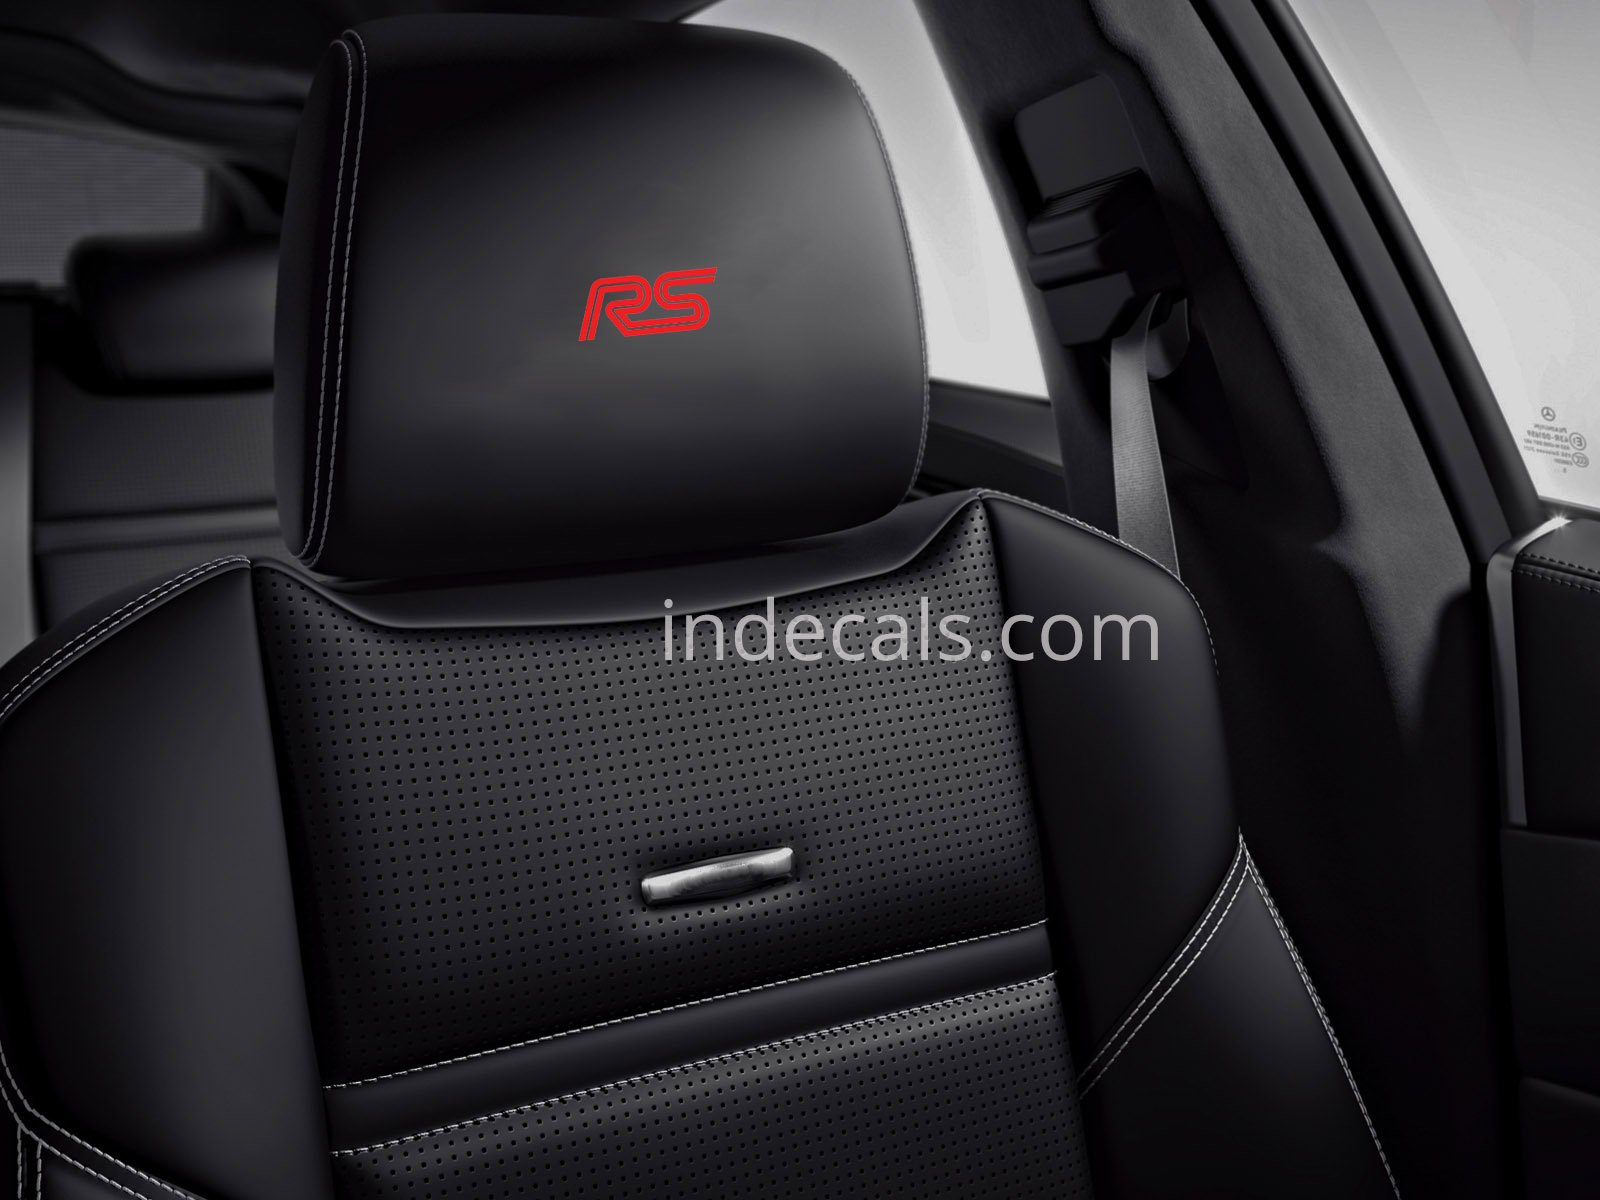 6 x Ford RS Stickers for Headrests - Red